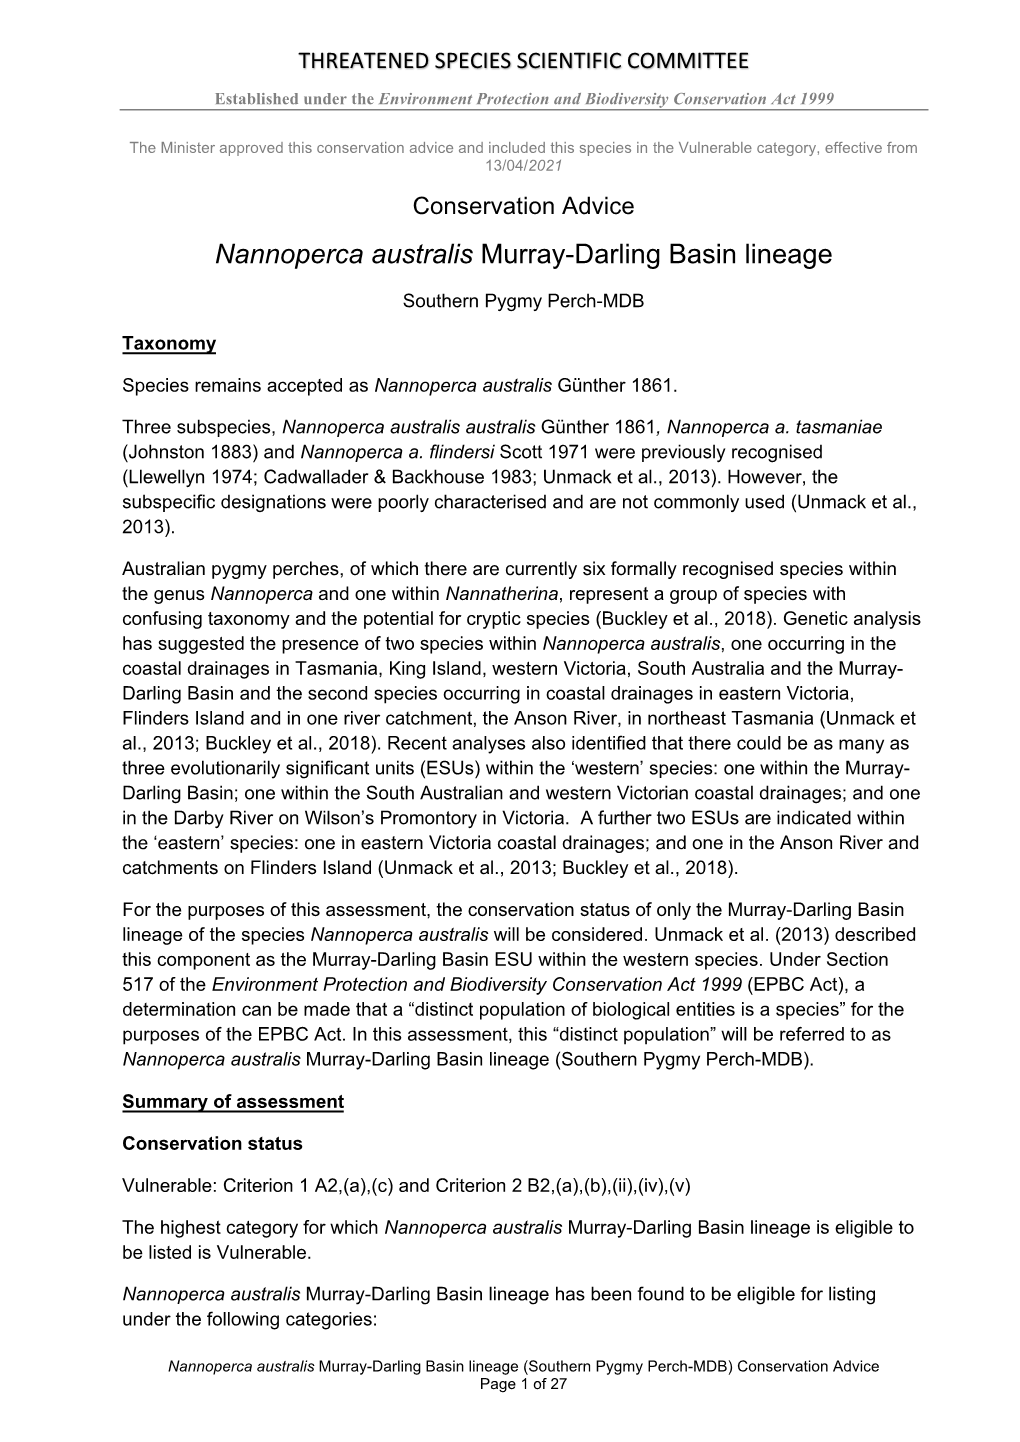 Conservation Advice Nannoperca Australis Murray-Darling Basin Lineage